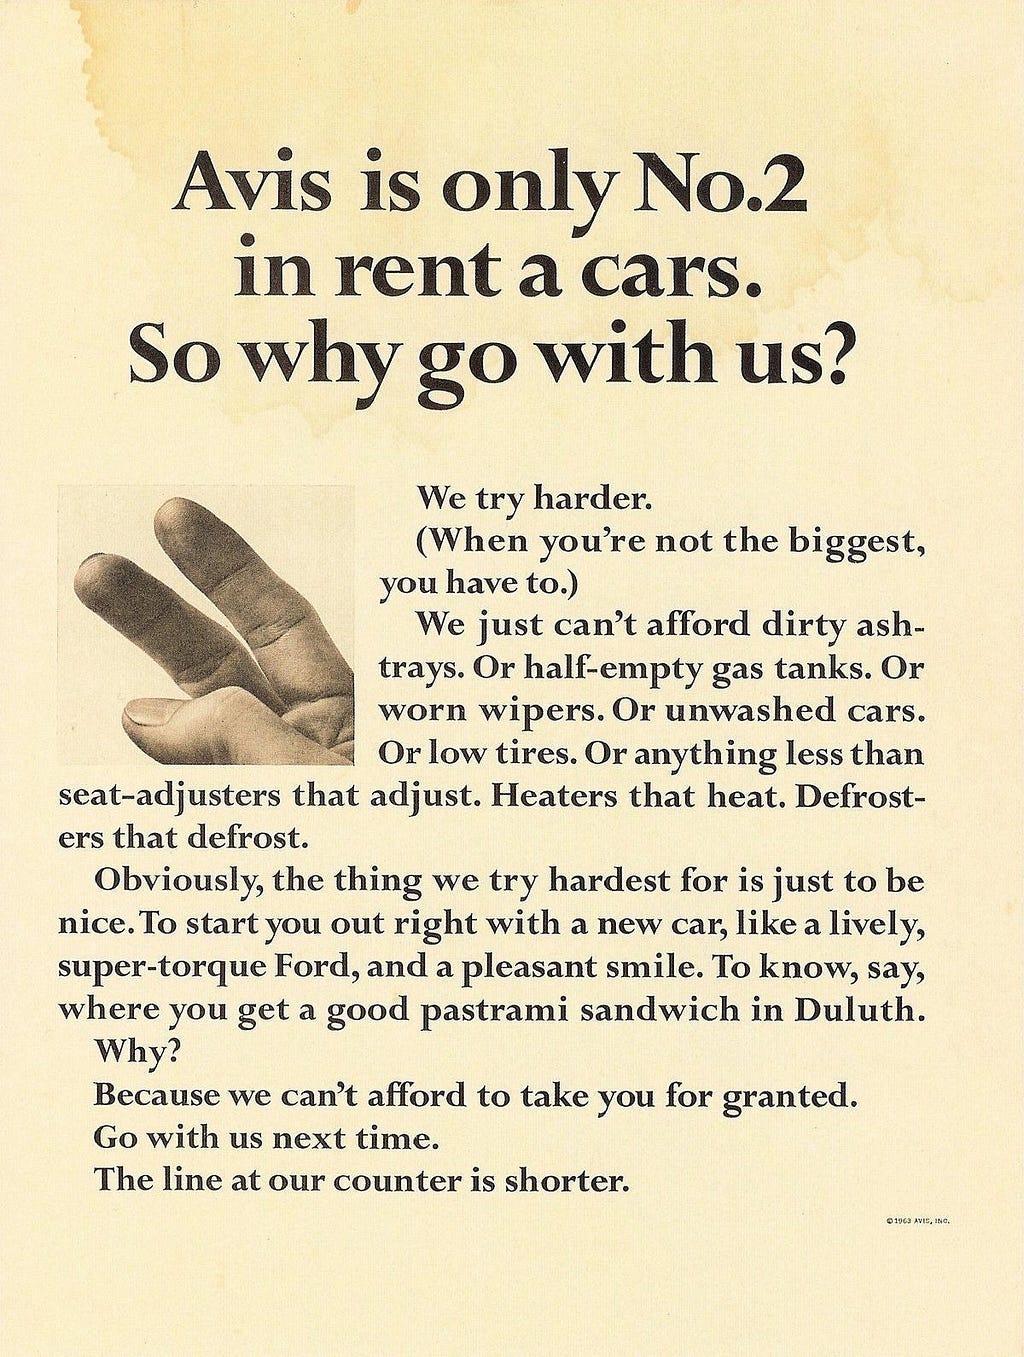 An advertisement from Avis in 1963: Avis is only №2 in rent a cars. So why go with us? We try harder. (When you’re not the biggest, you have to.) We just can’t afford dirty ashtrays. Or half-empty gas tanks. Or worn wipers. Or unwashed cars. Or low tires. Or anything less than seat-adjusters that adjust. Heaters that heat. Defrosters that defrost. Obviously, the thing we try hardest for is just to be nice…